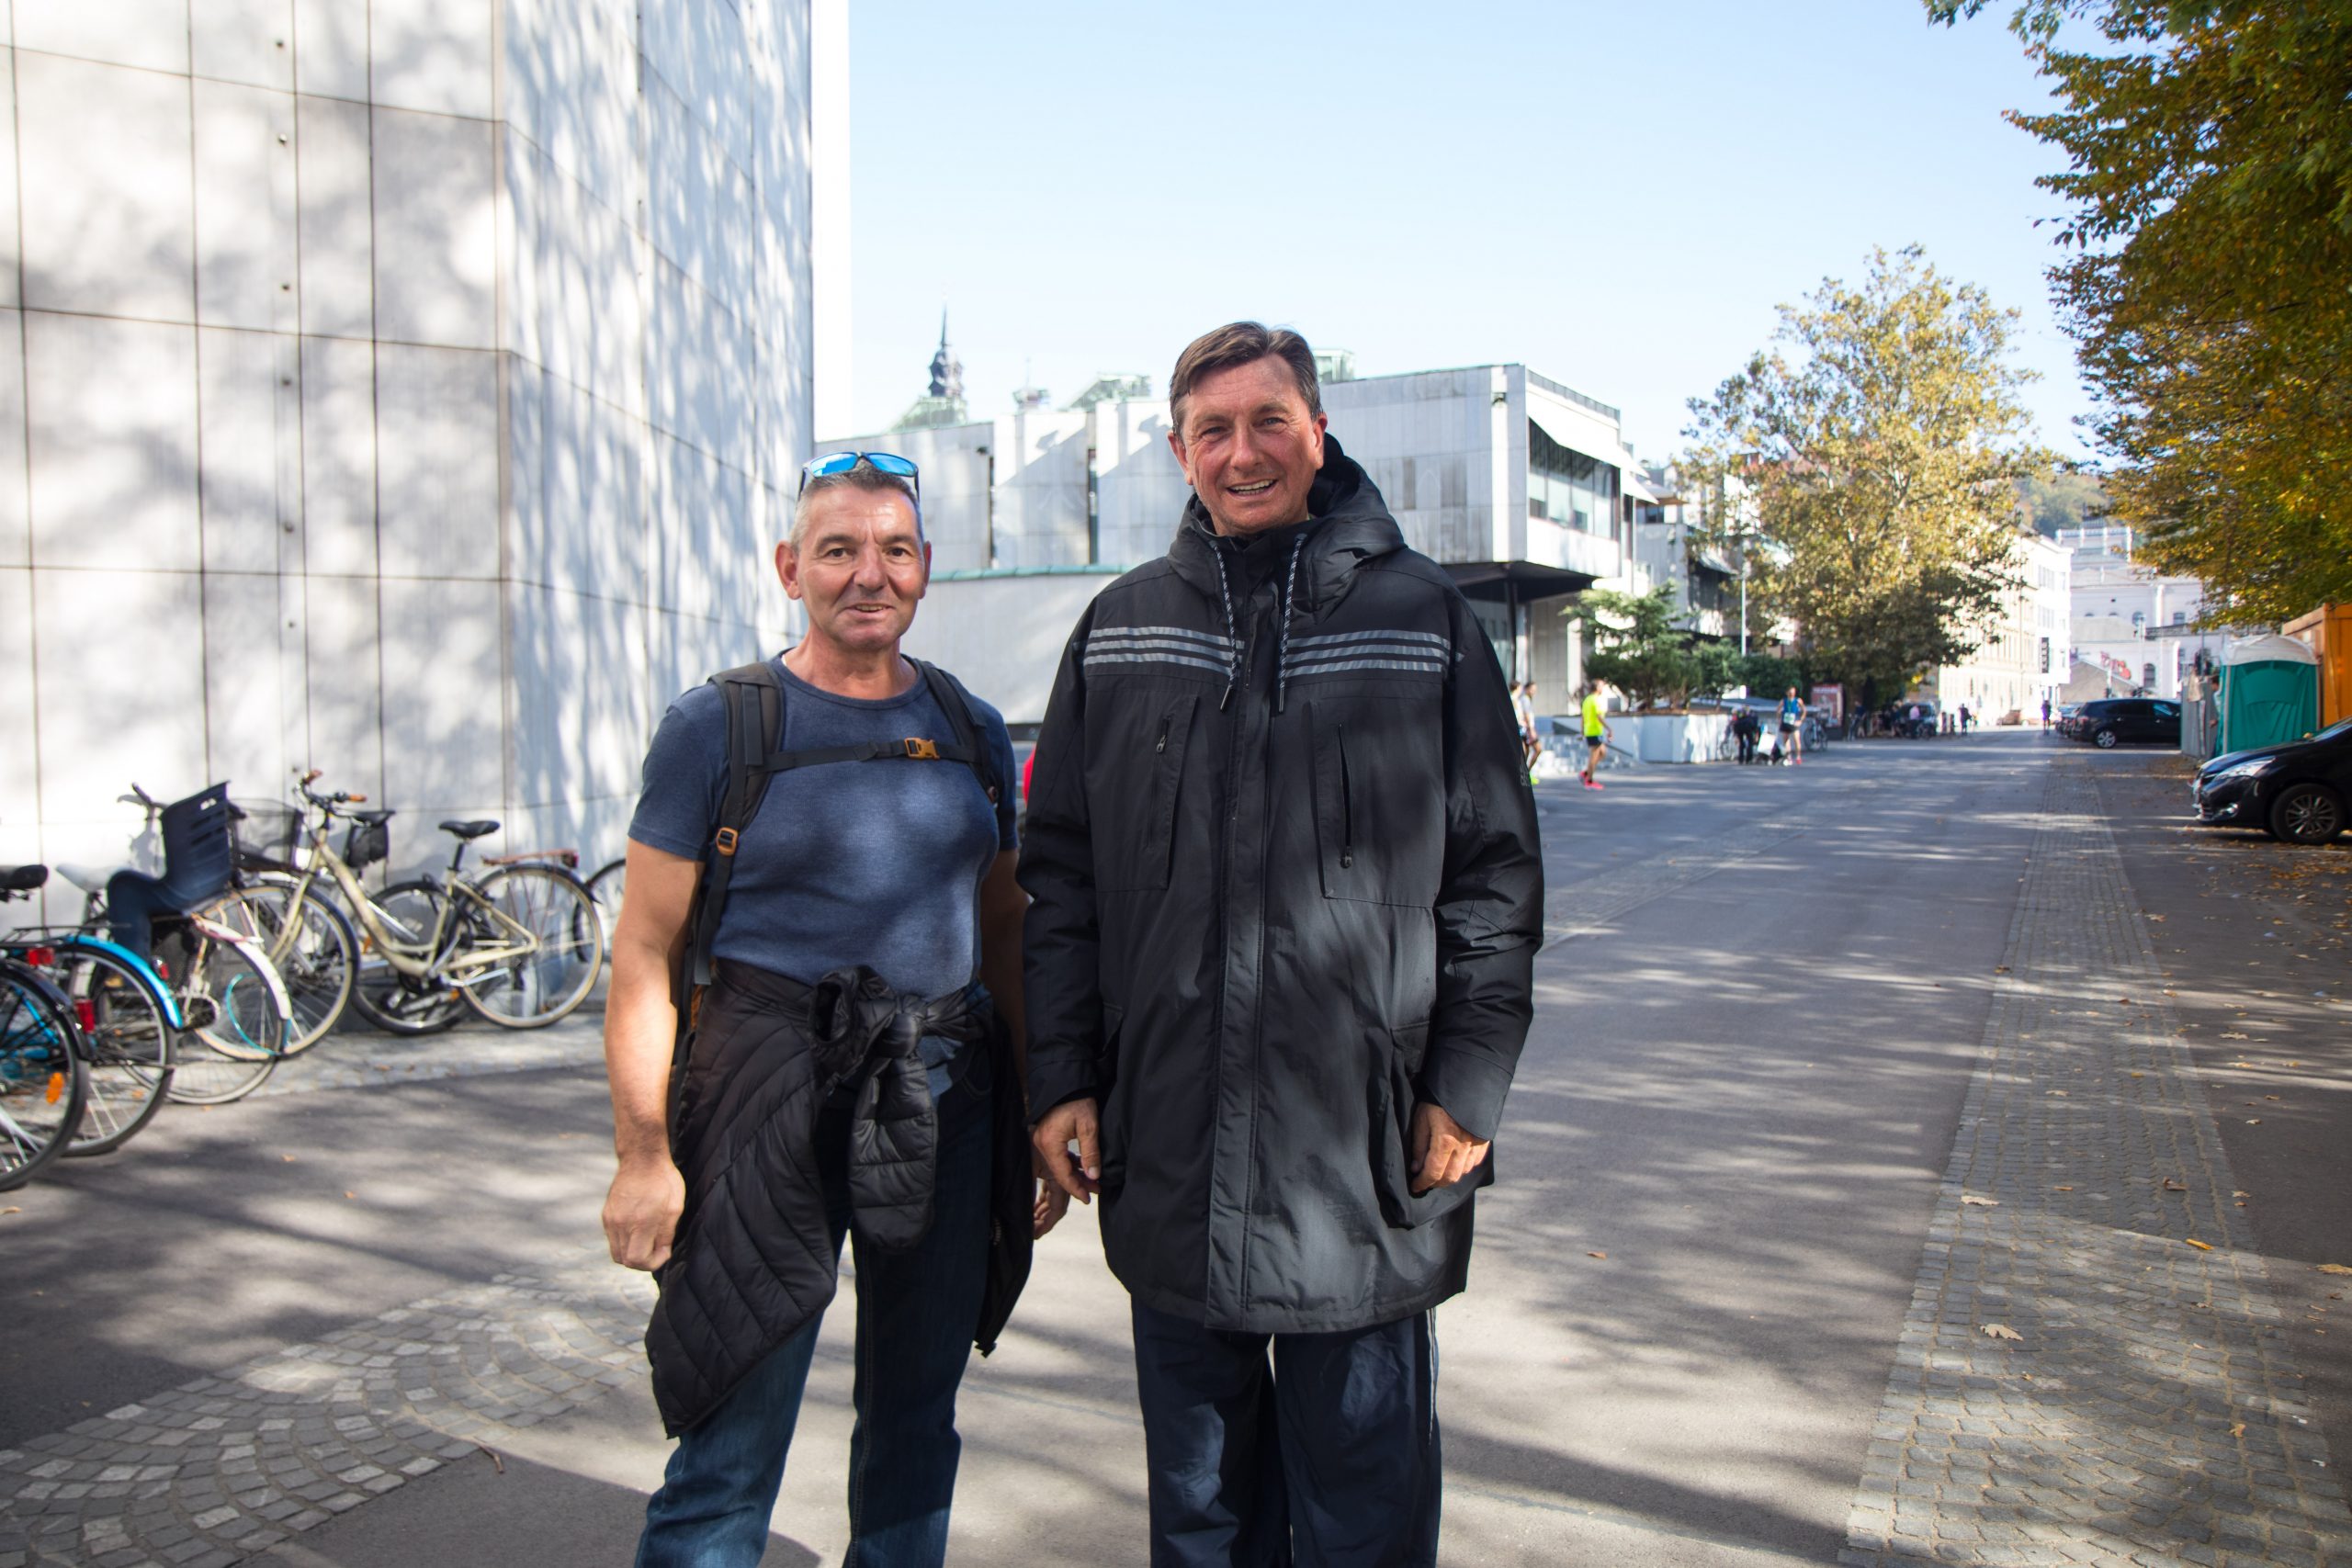 So while I was running, my dad actually managed to get a photo with the president of Slovenia, Borut Pahor.